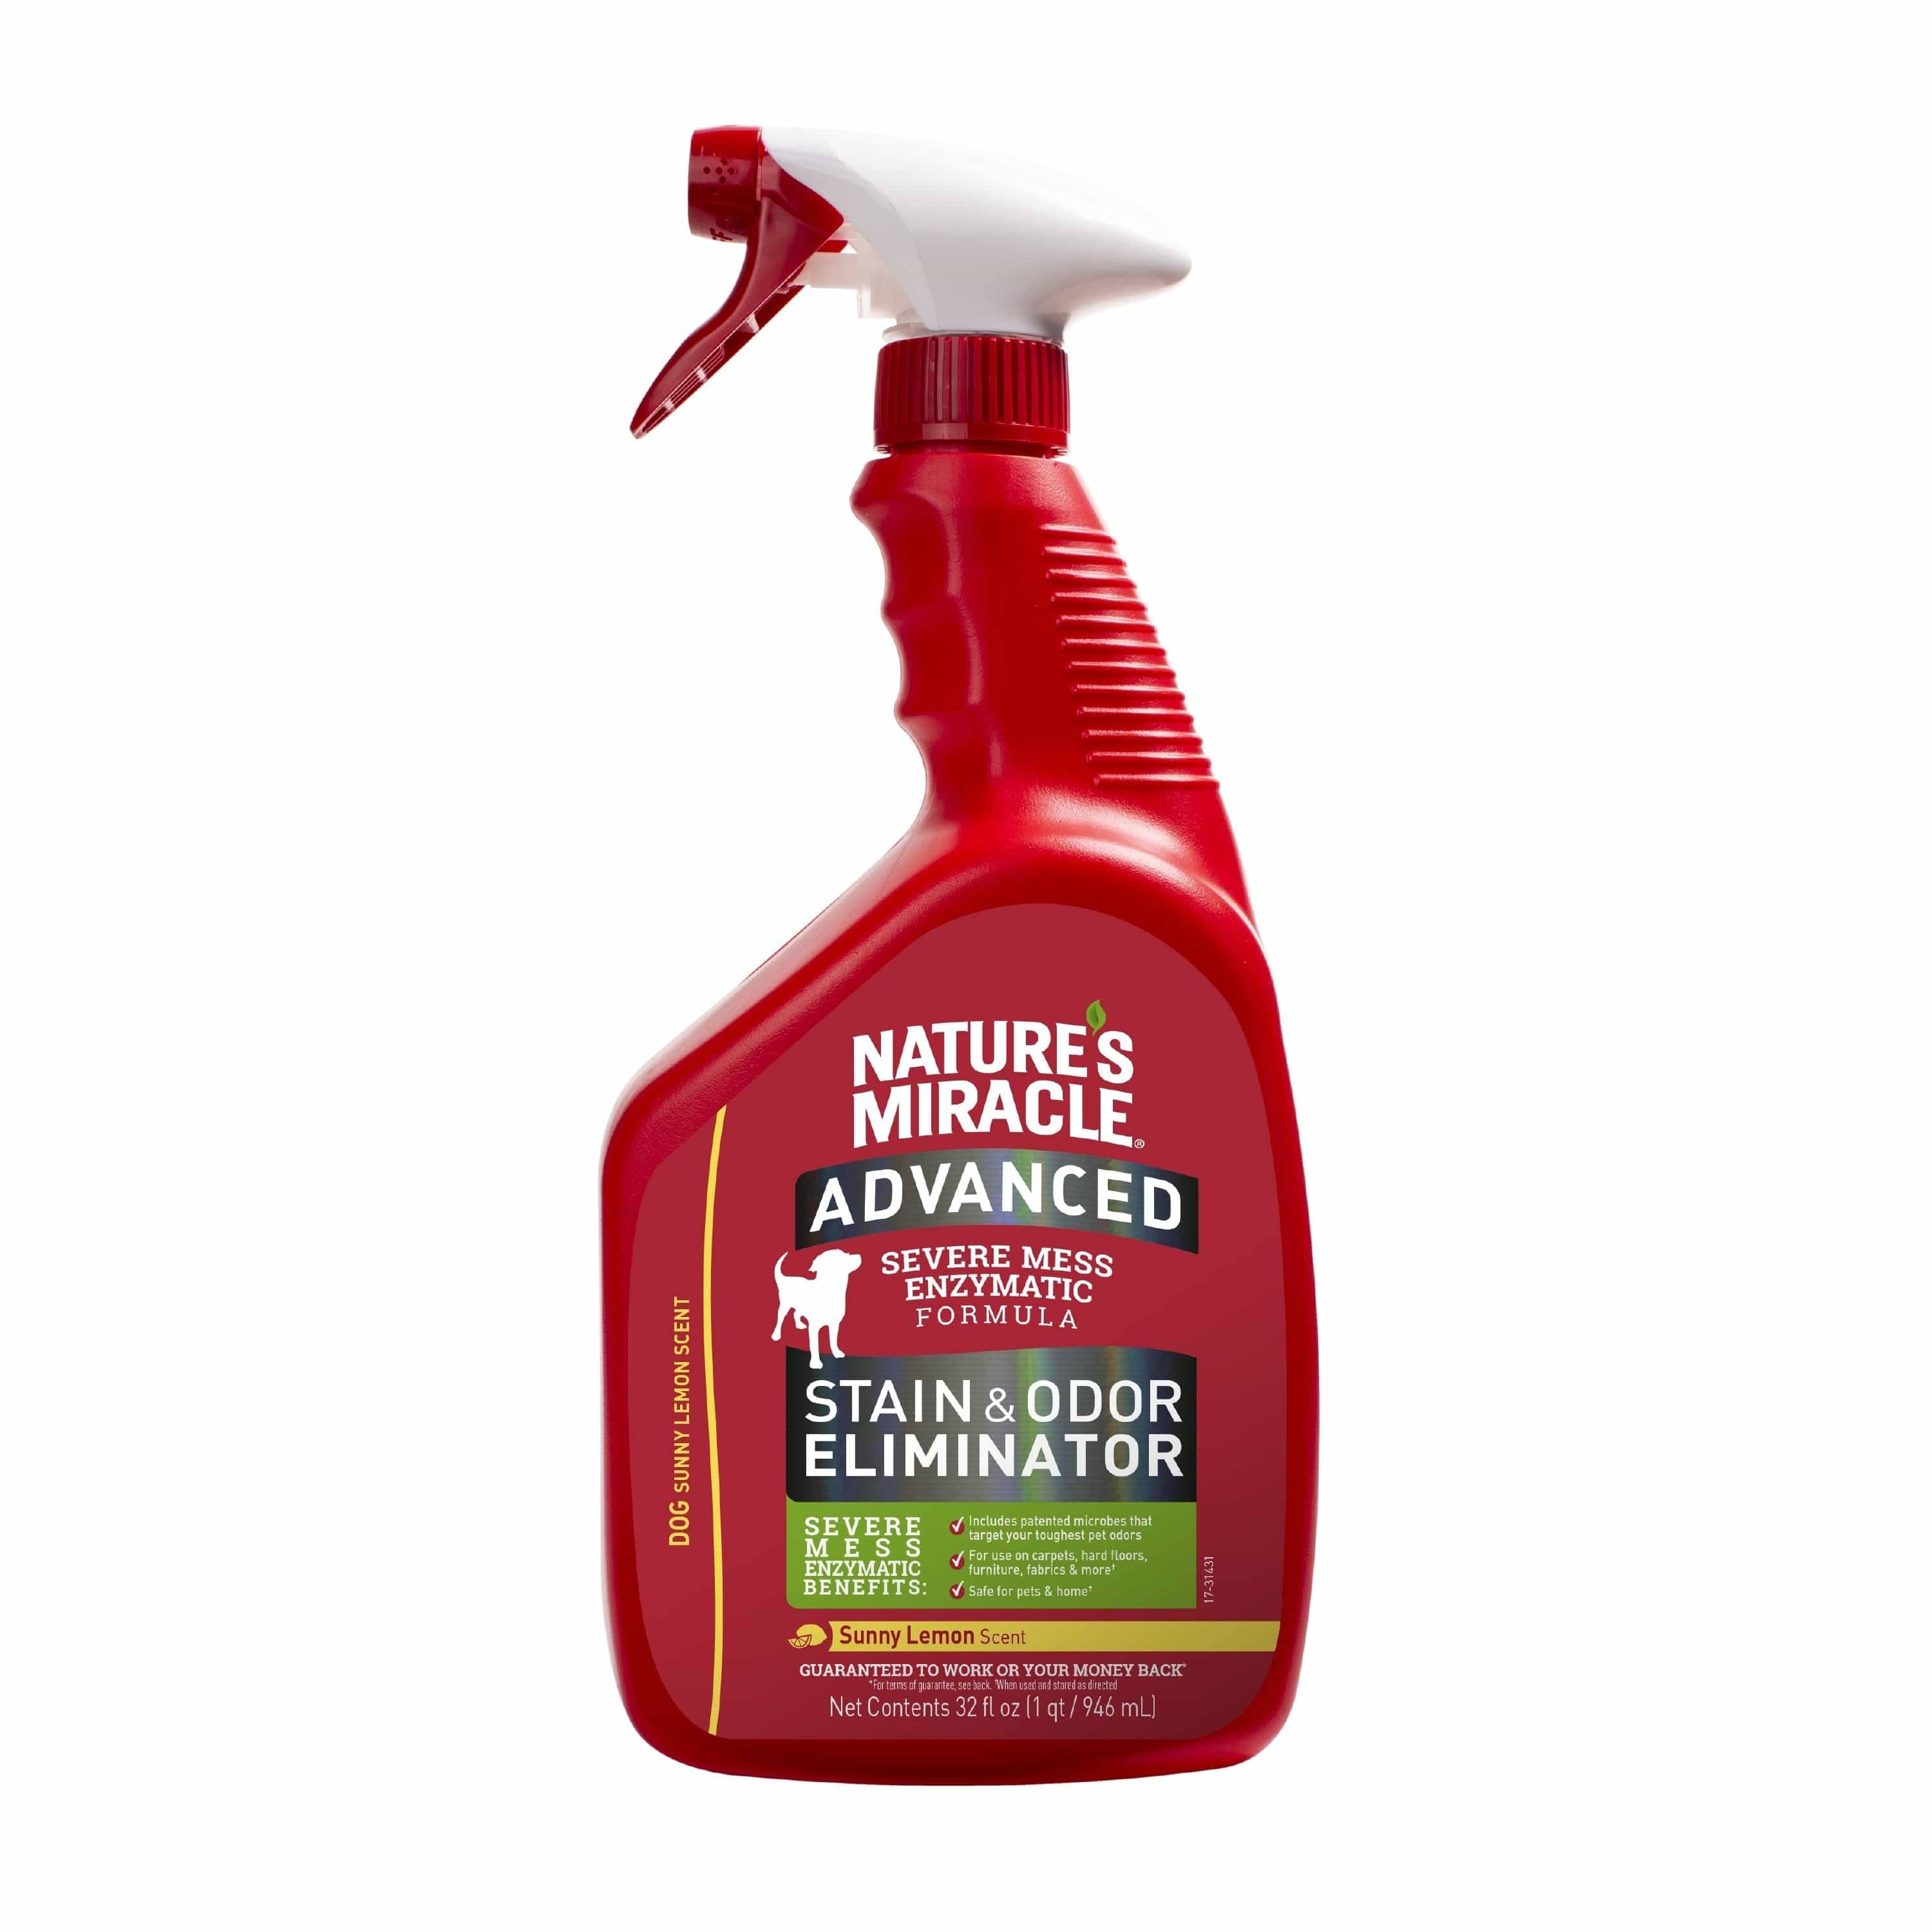 Nature's Miracle Advanced Stain and Odor Remover Spray - Sunny Lemon, 32oz